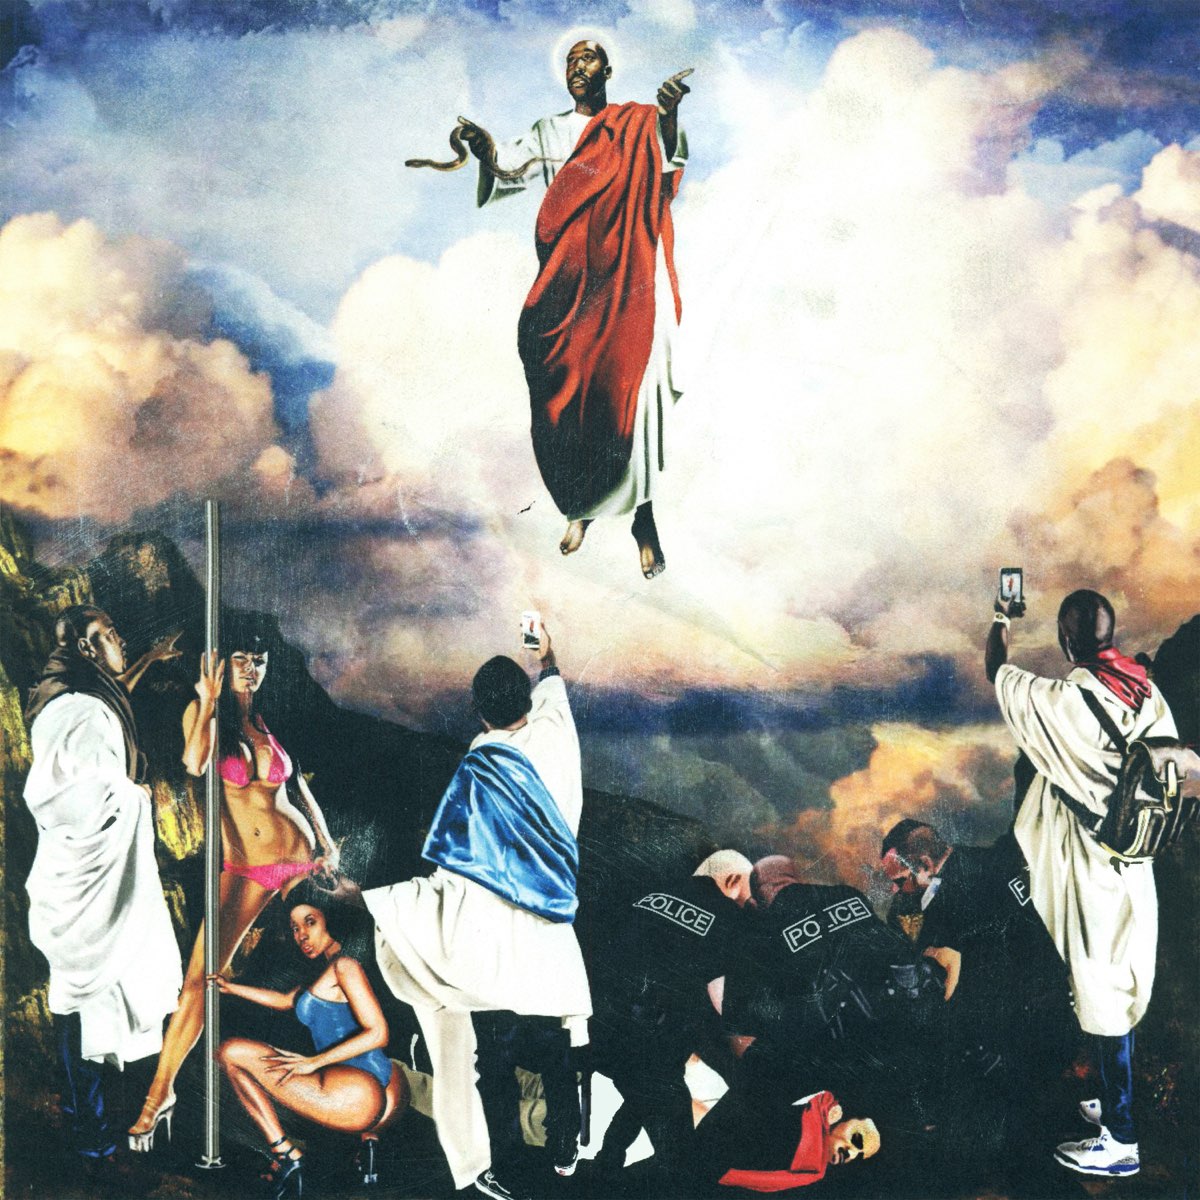 You Only Live 2wice by Freddie Gibbs on Apple Music